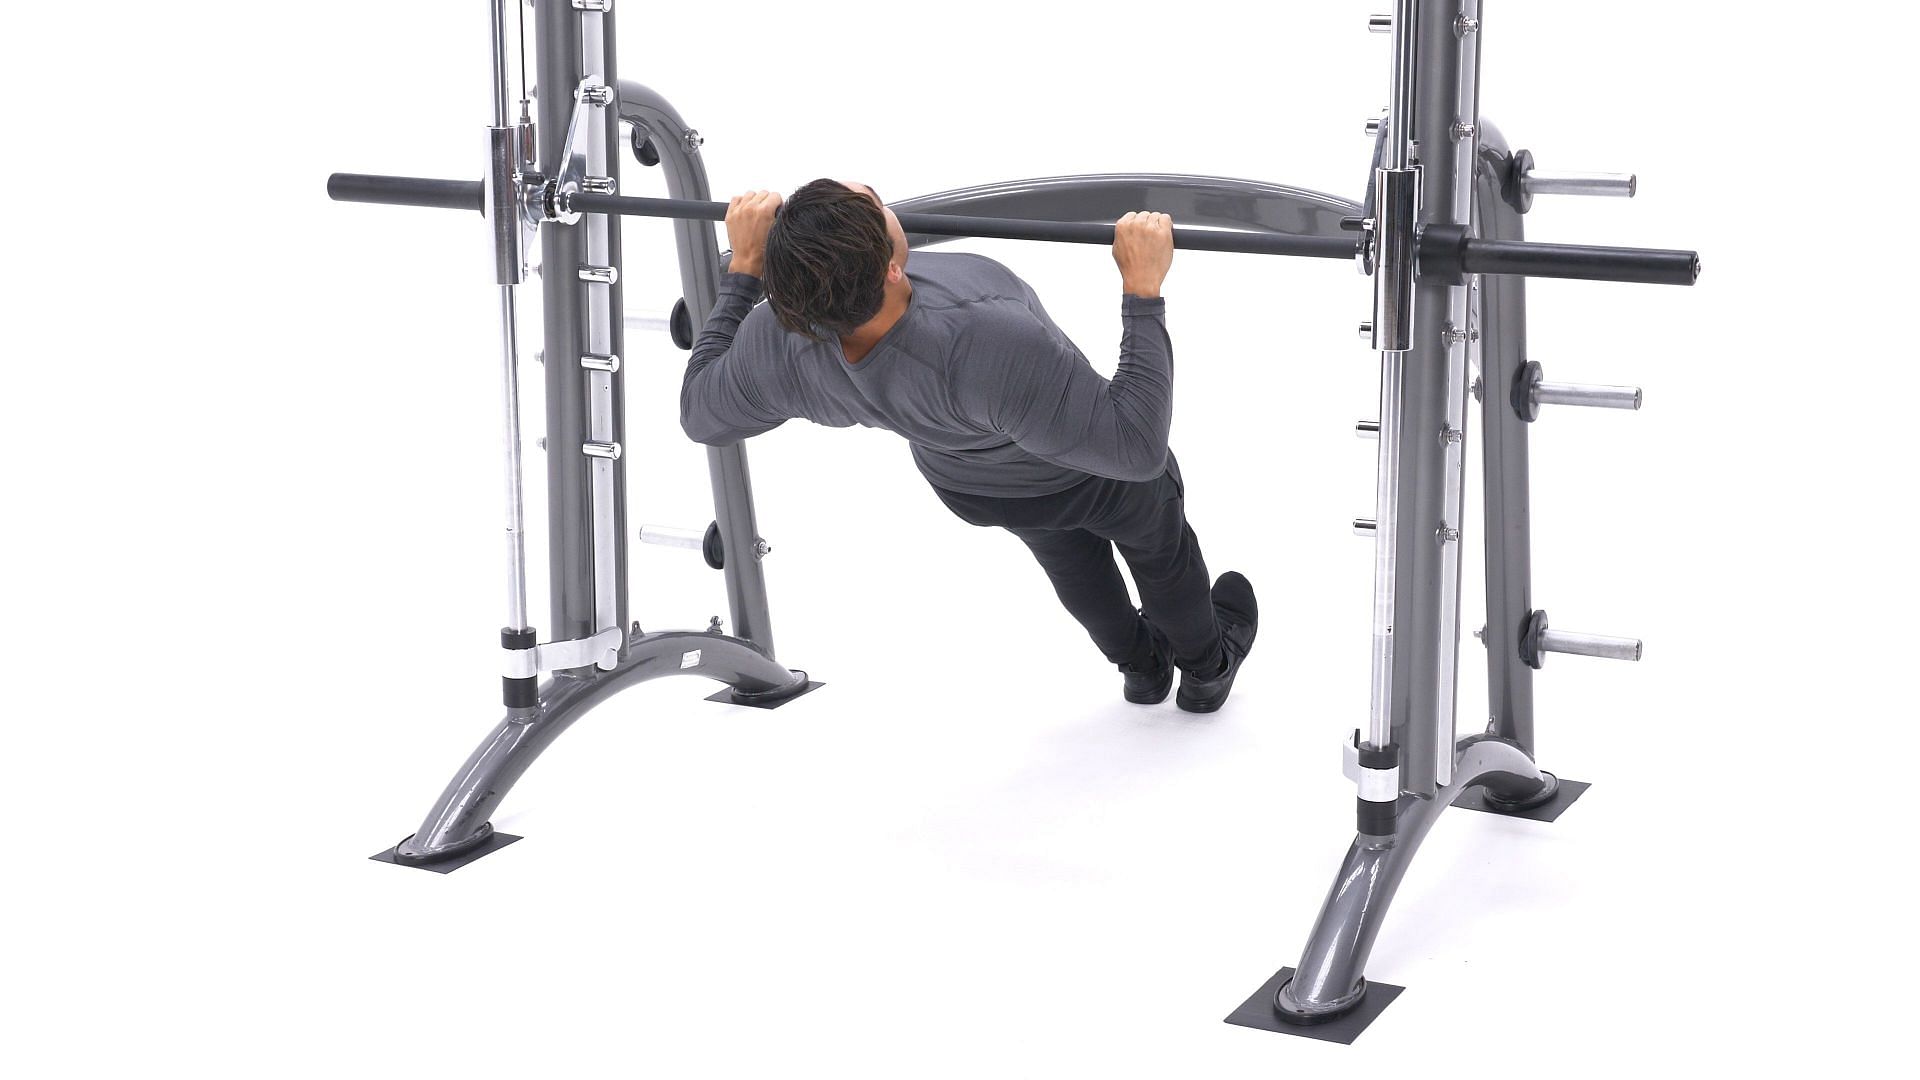 An Inverted Row on a Smith Machine